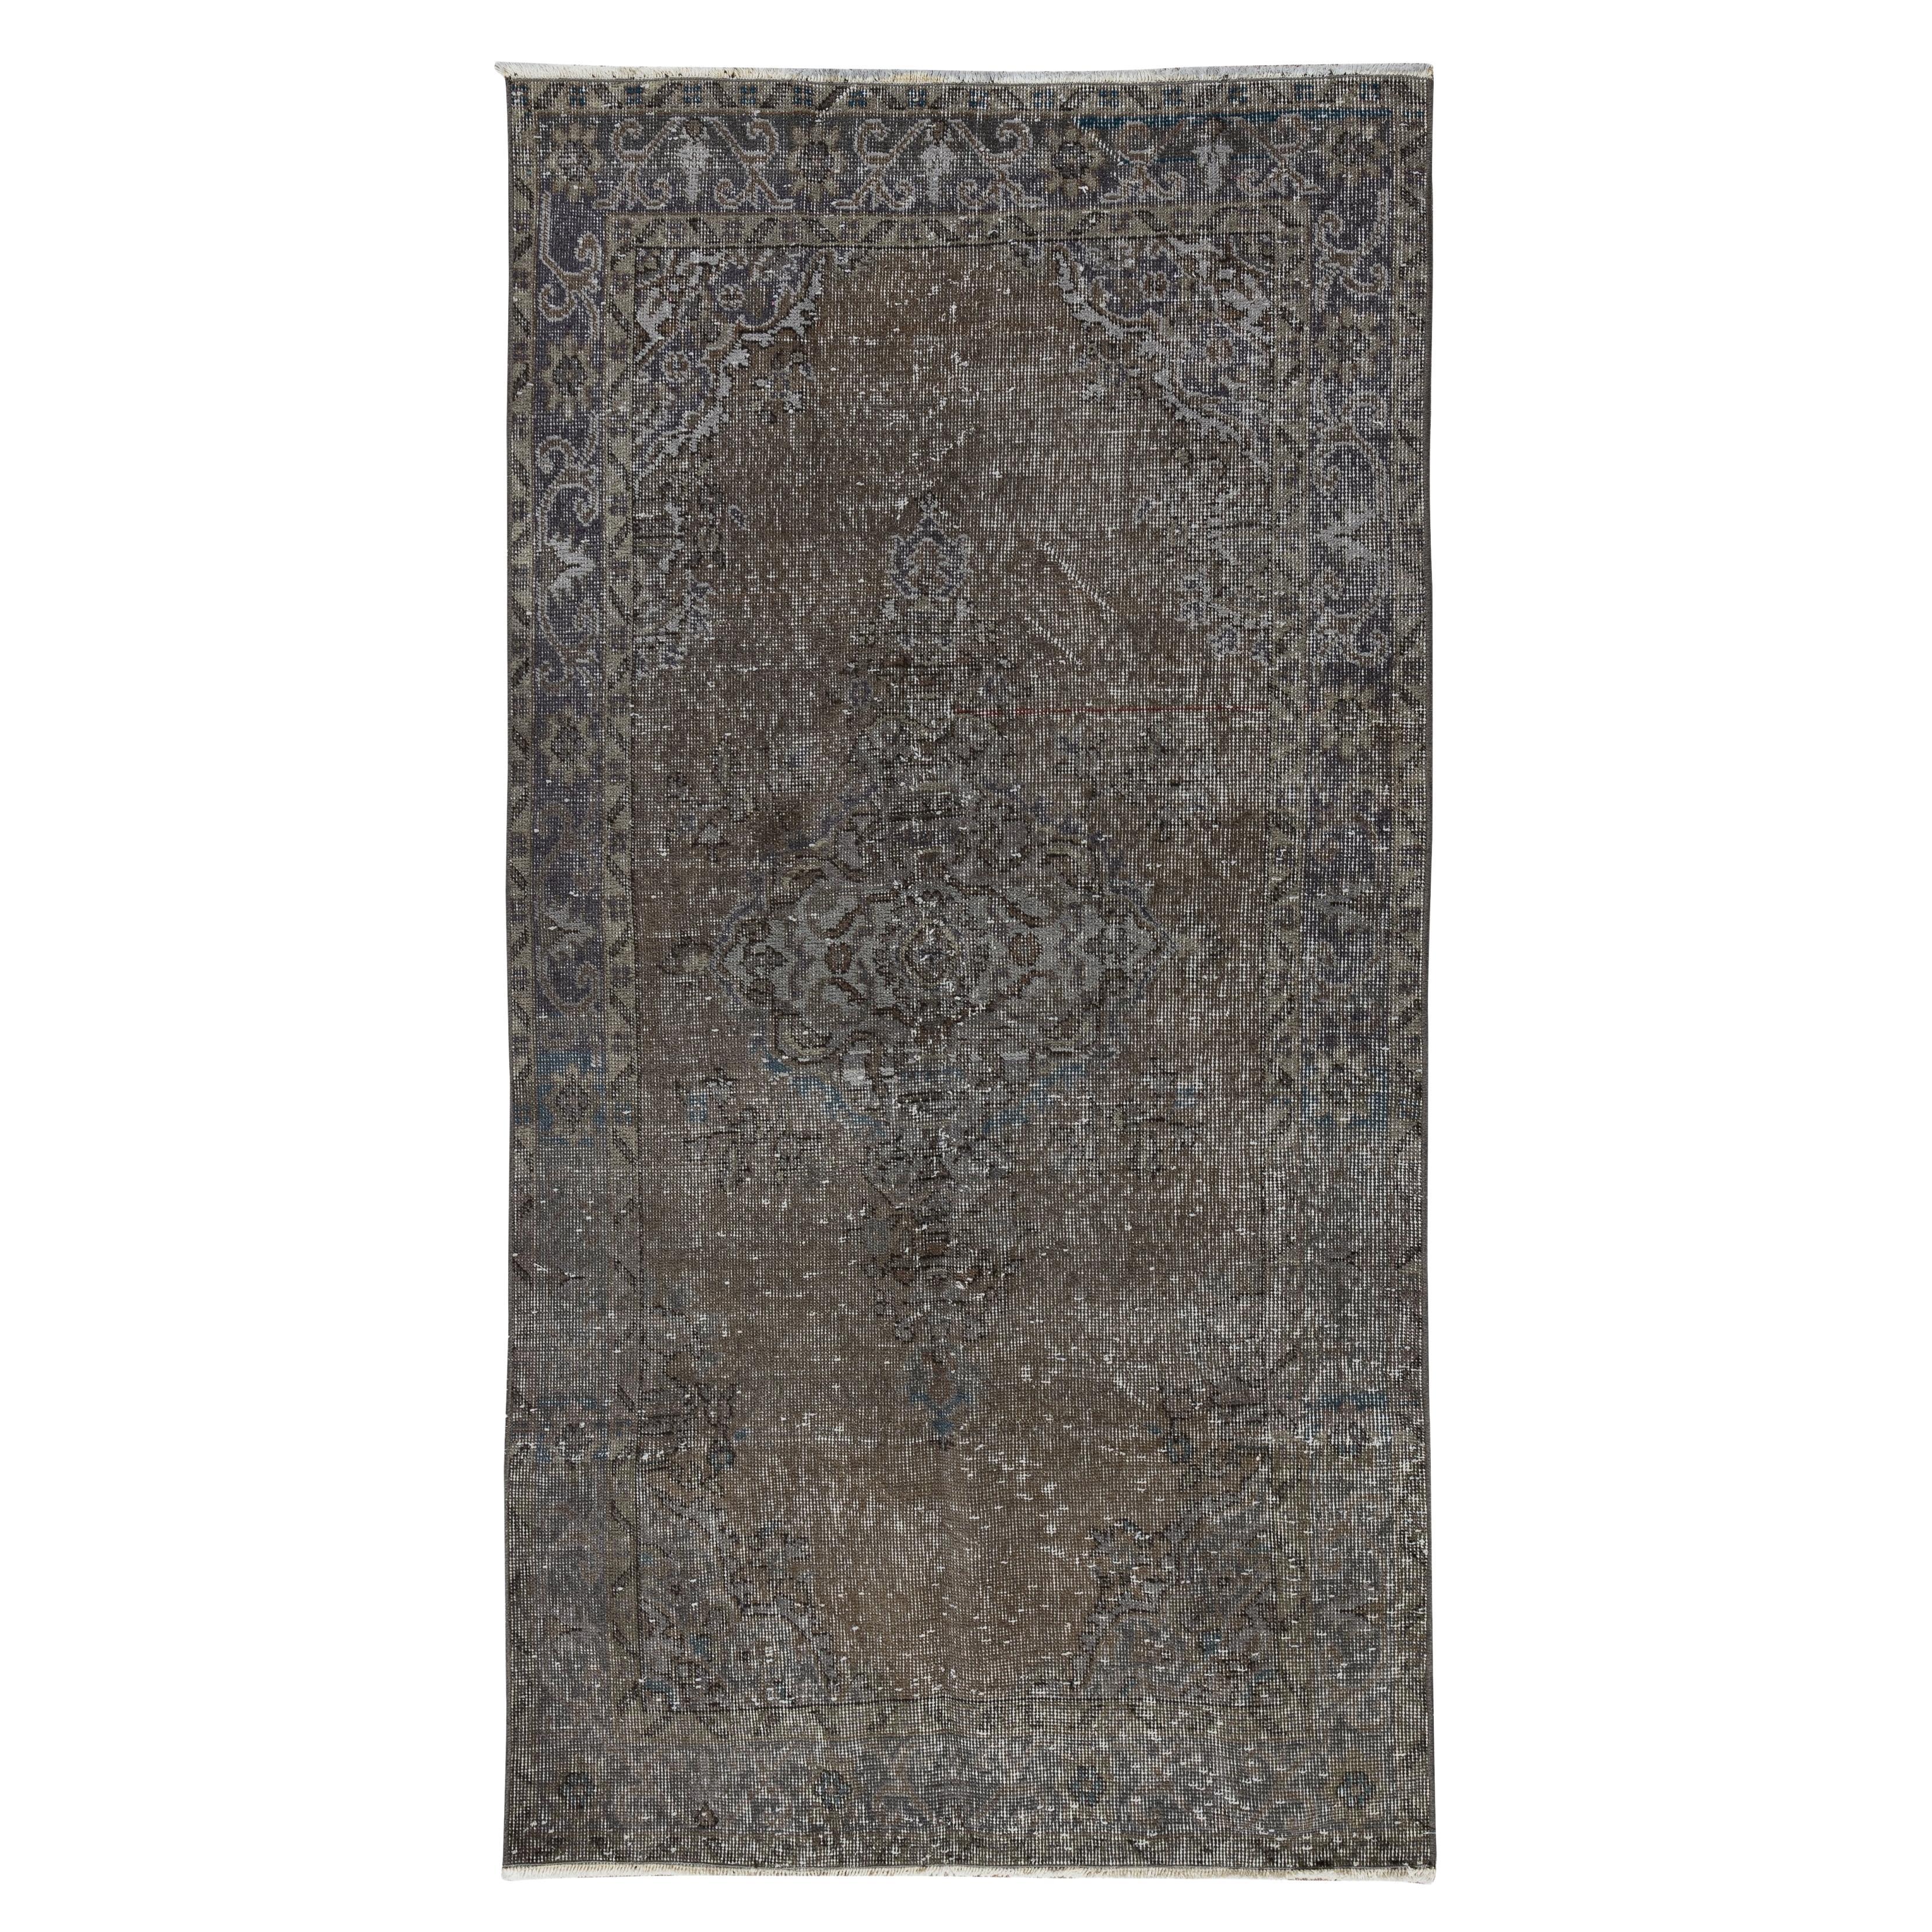 Handmade Turkish Accent Rug in Brown and Gray, Modern Exclusive Carpet For Sale